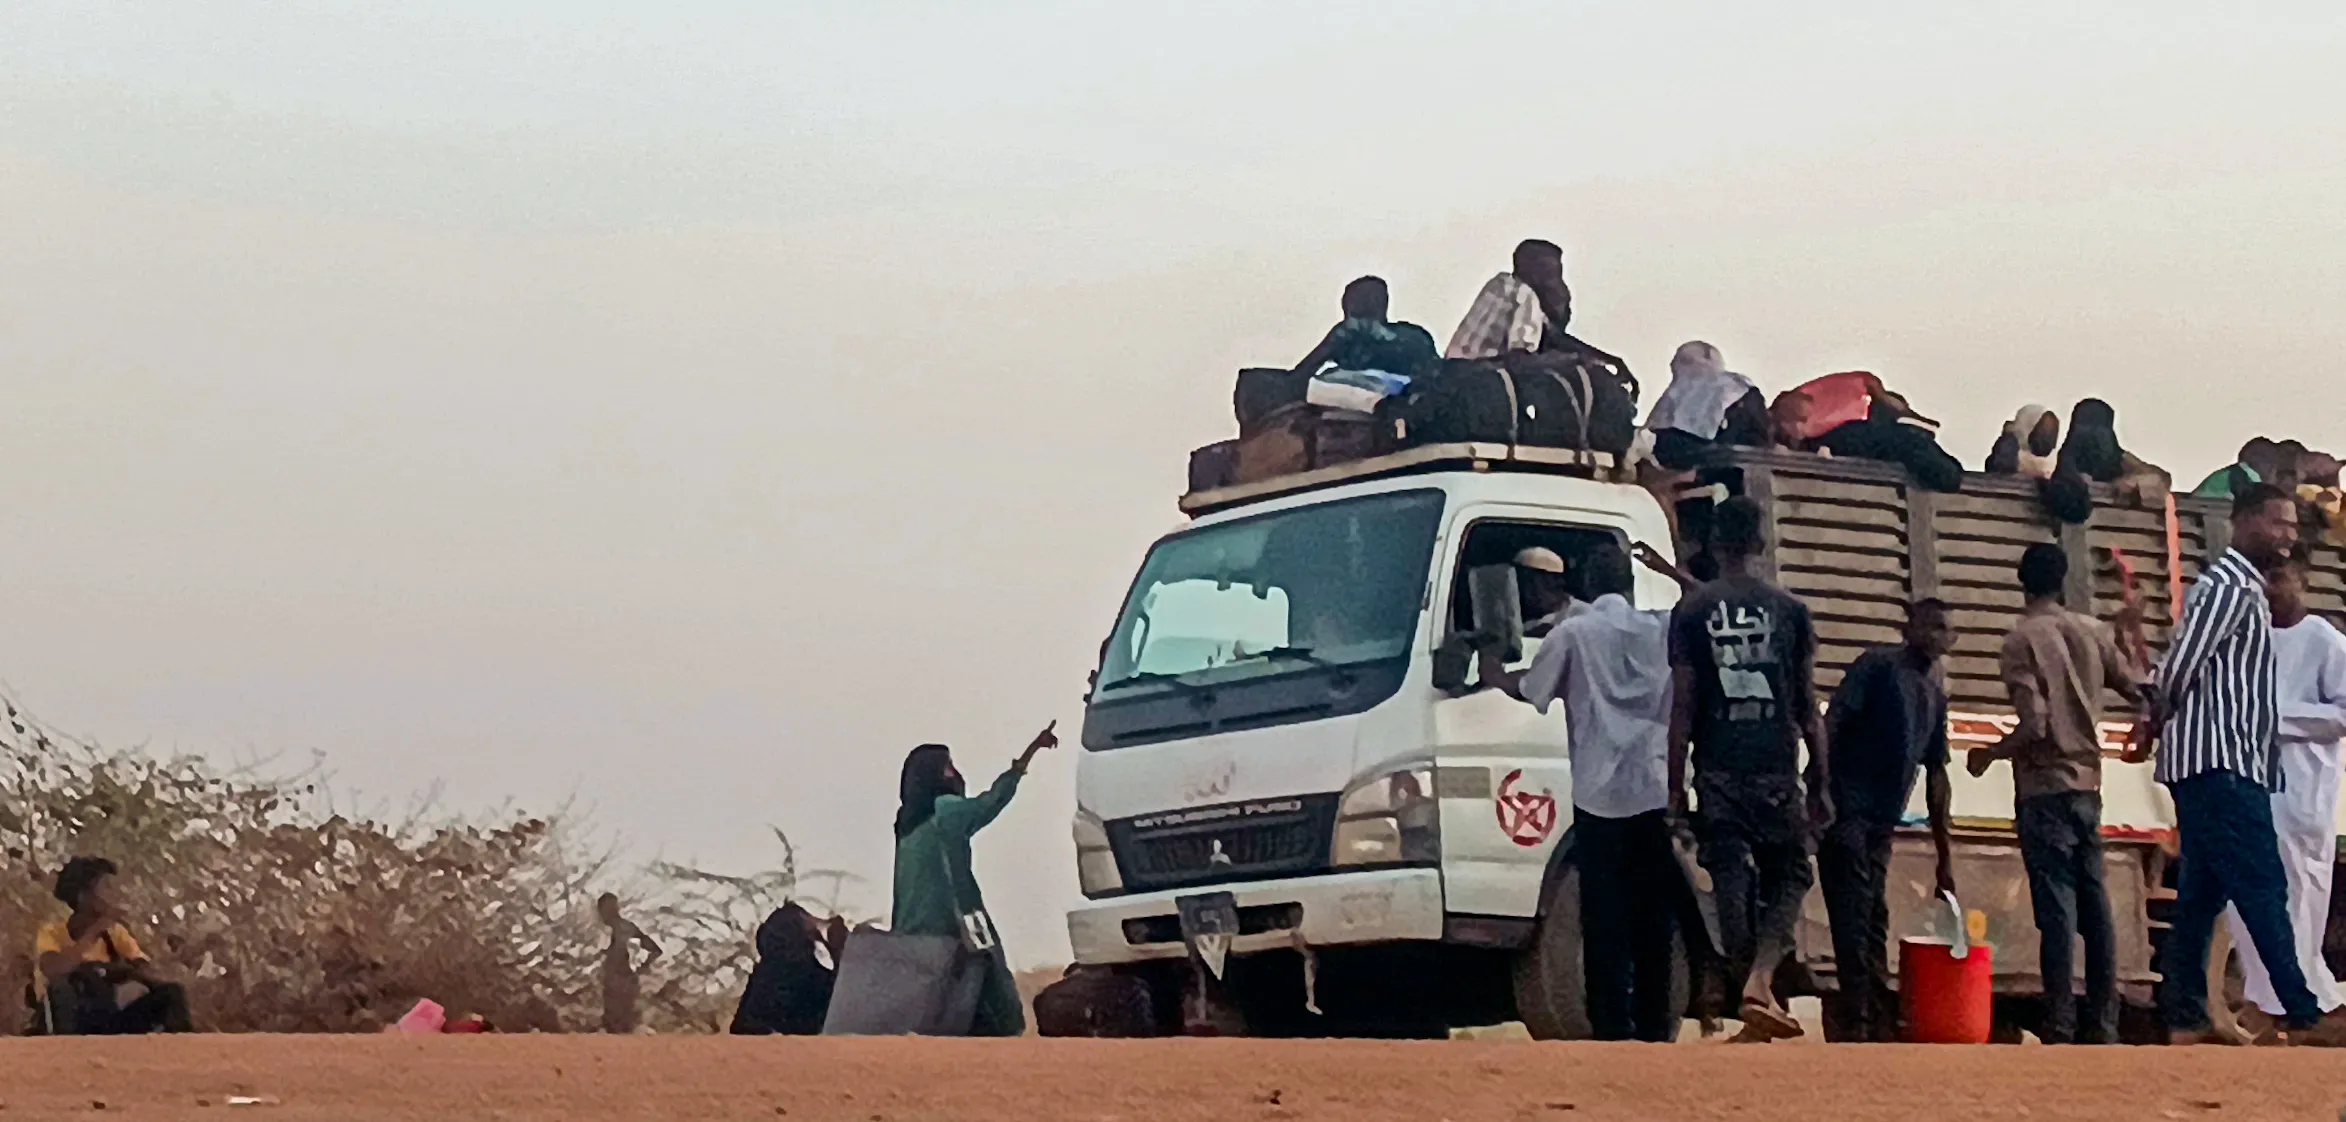 A group of people standing on top of a truck